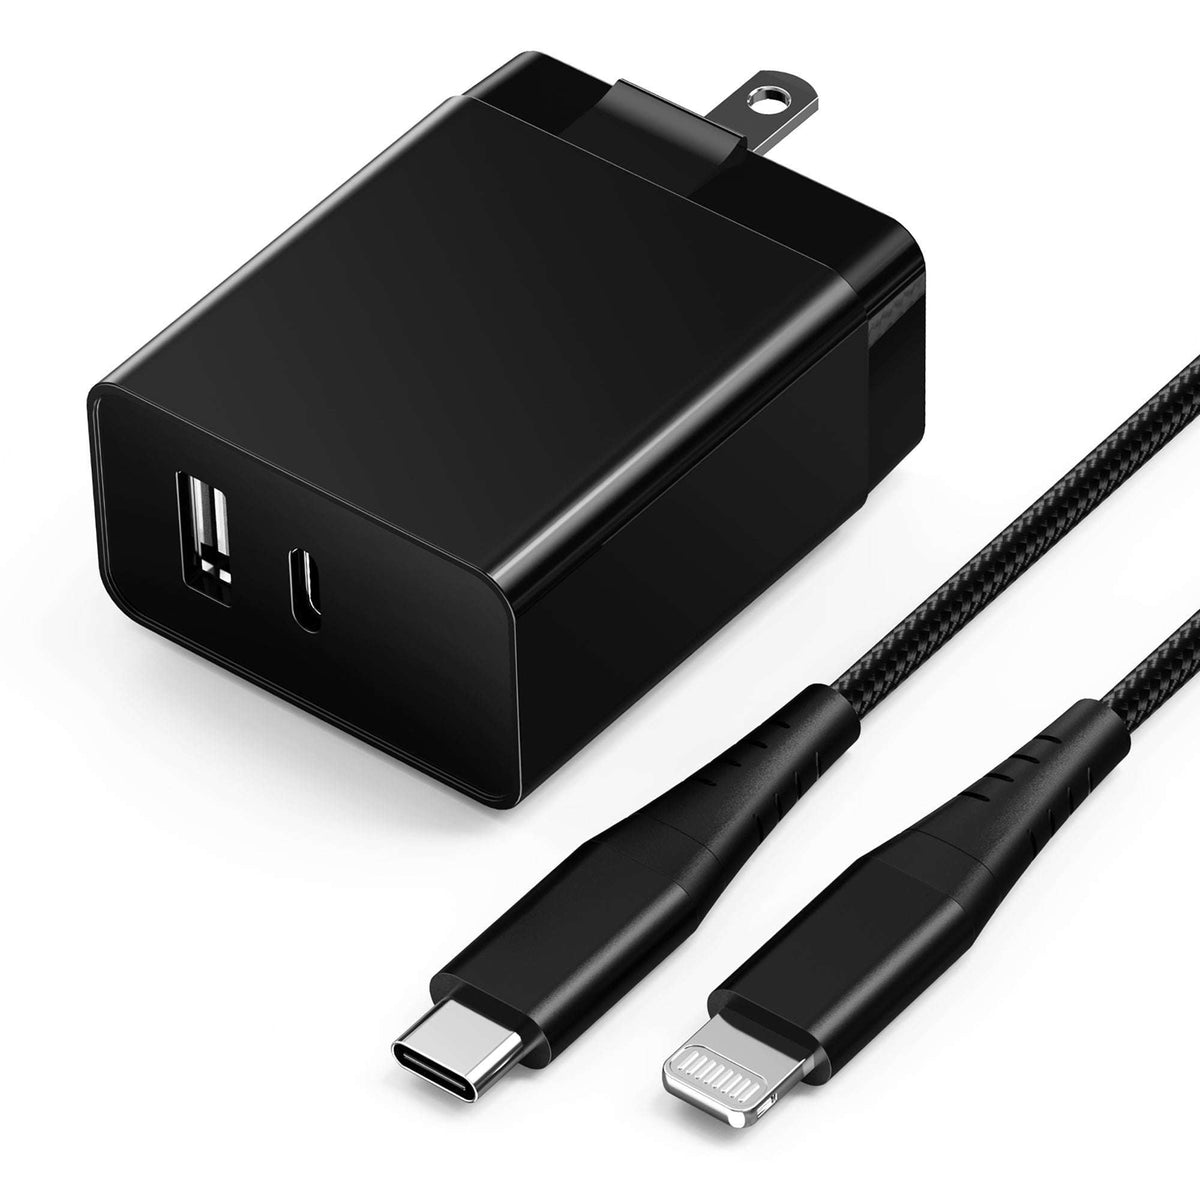 USB-PD 20W Wall Charger with Apple MFi Lightning Cable (6ft)